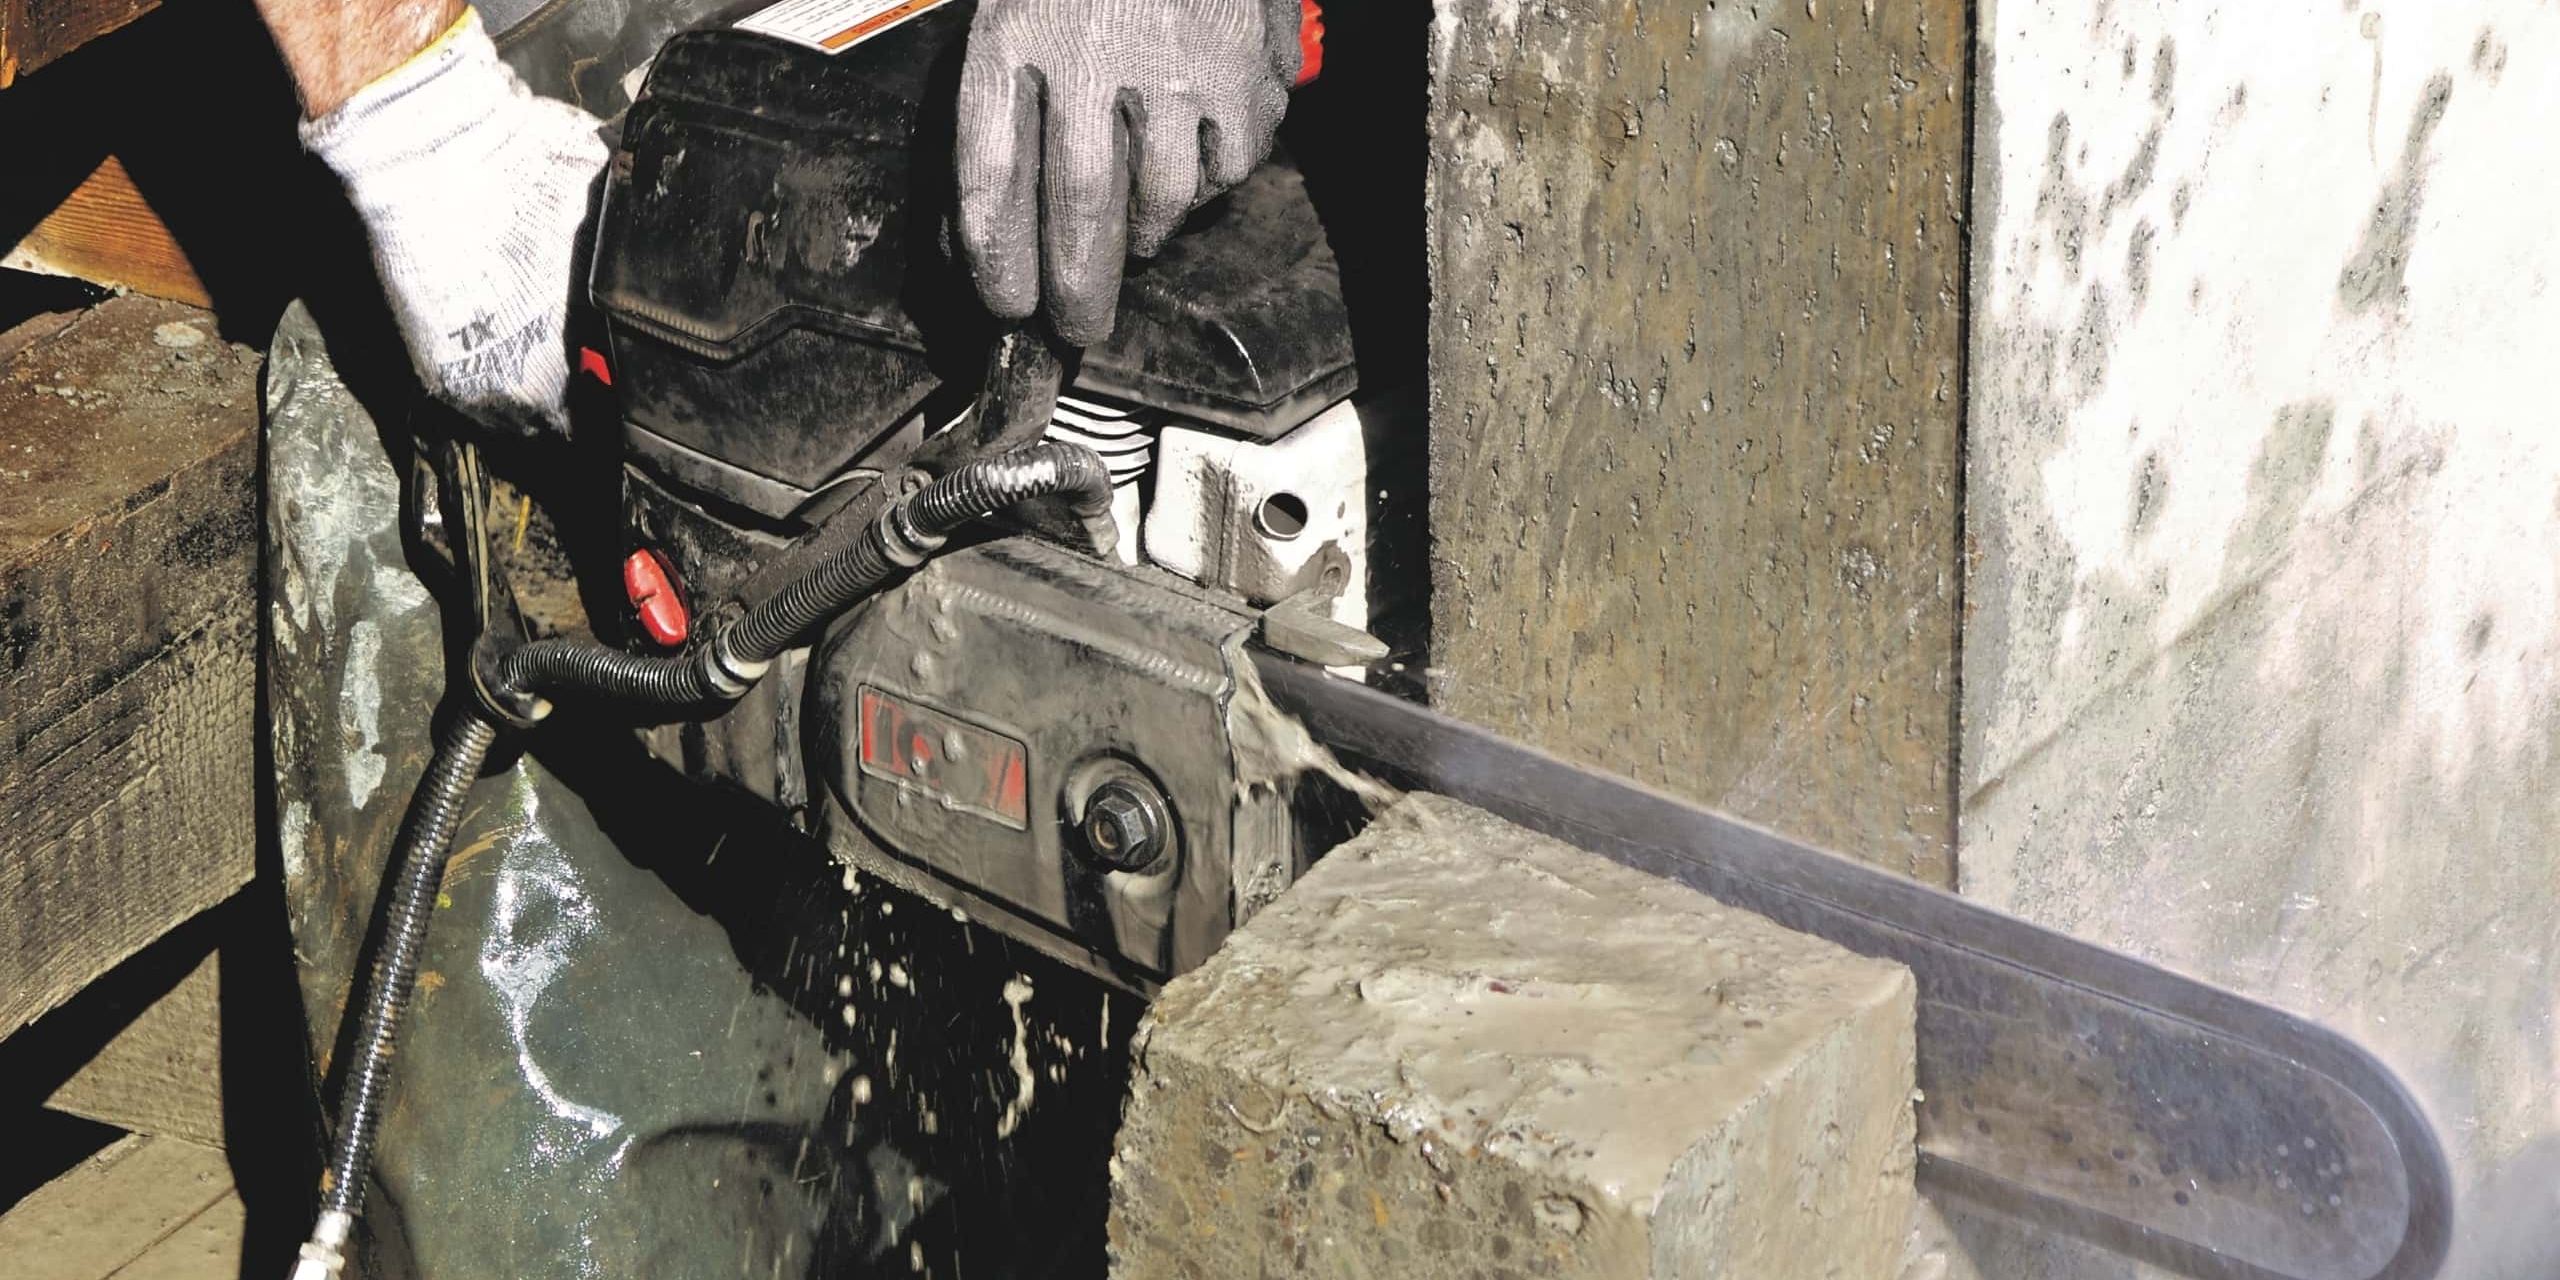 Cutting Concrete with a Diamond Chainsaw